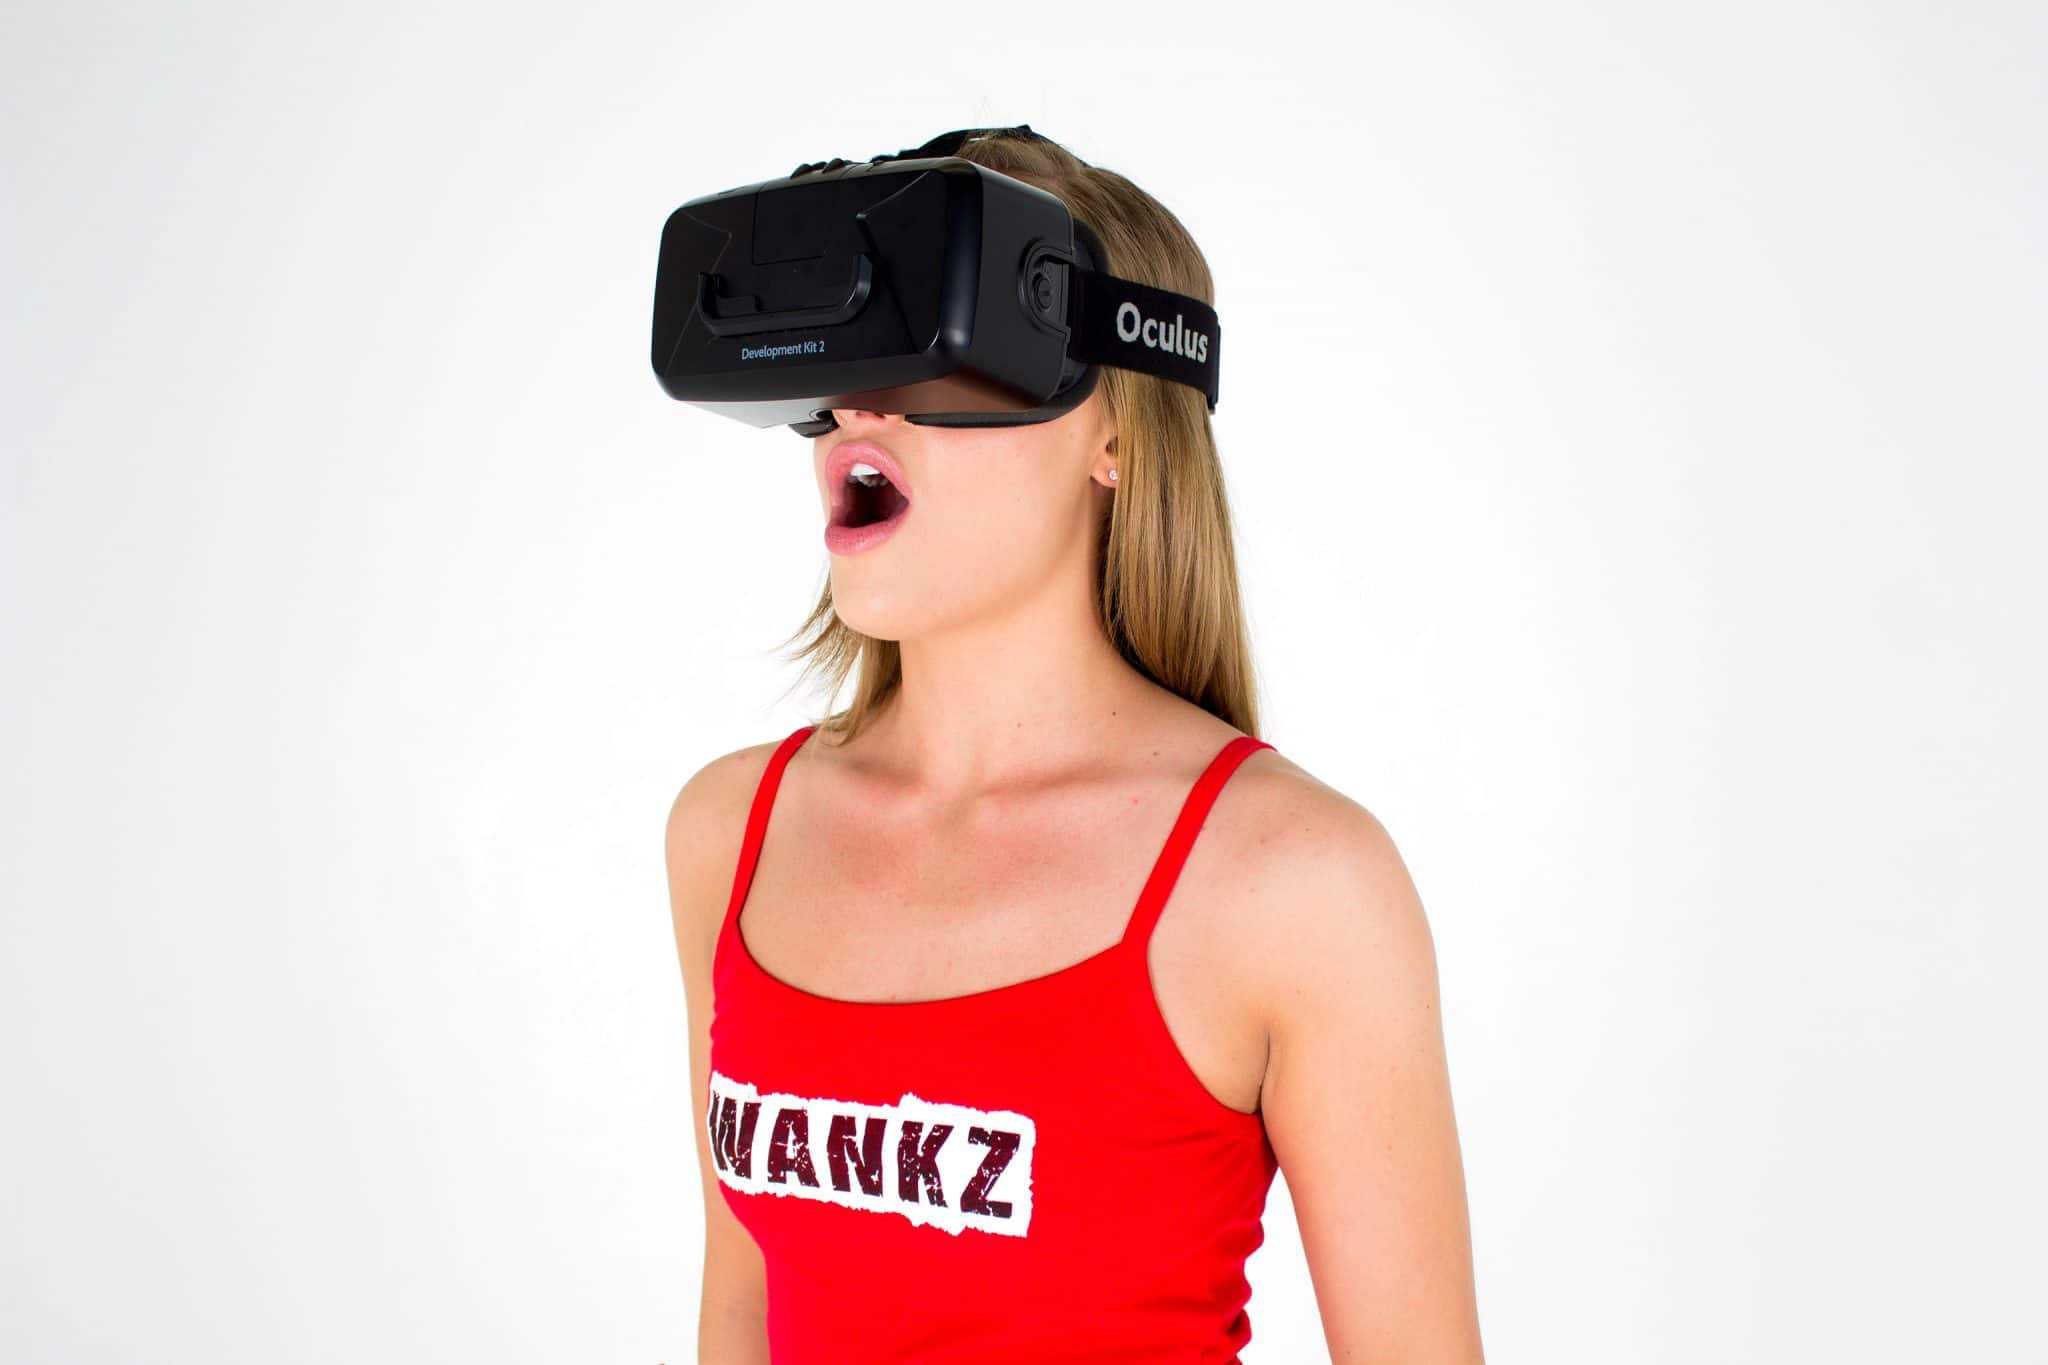 A woman explores cross-industry innovation while wearing a virtual reality headset.